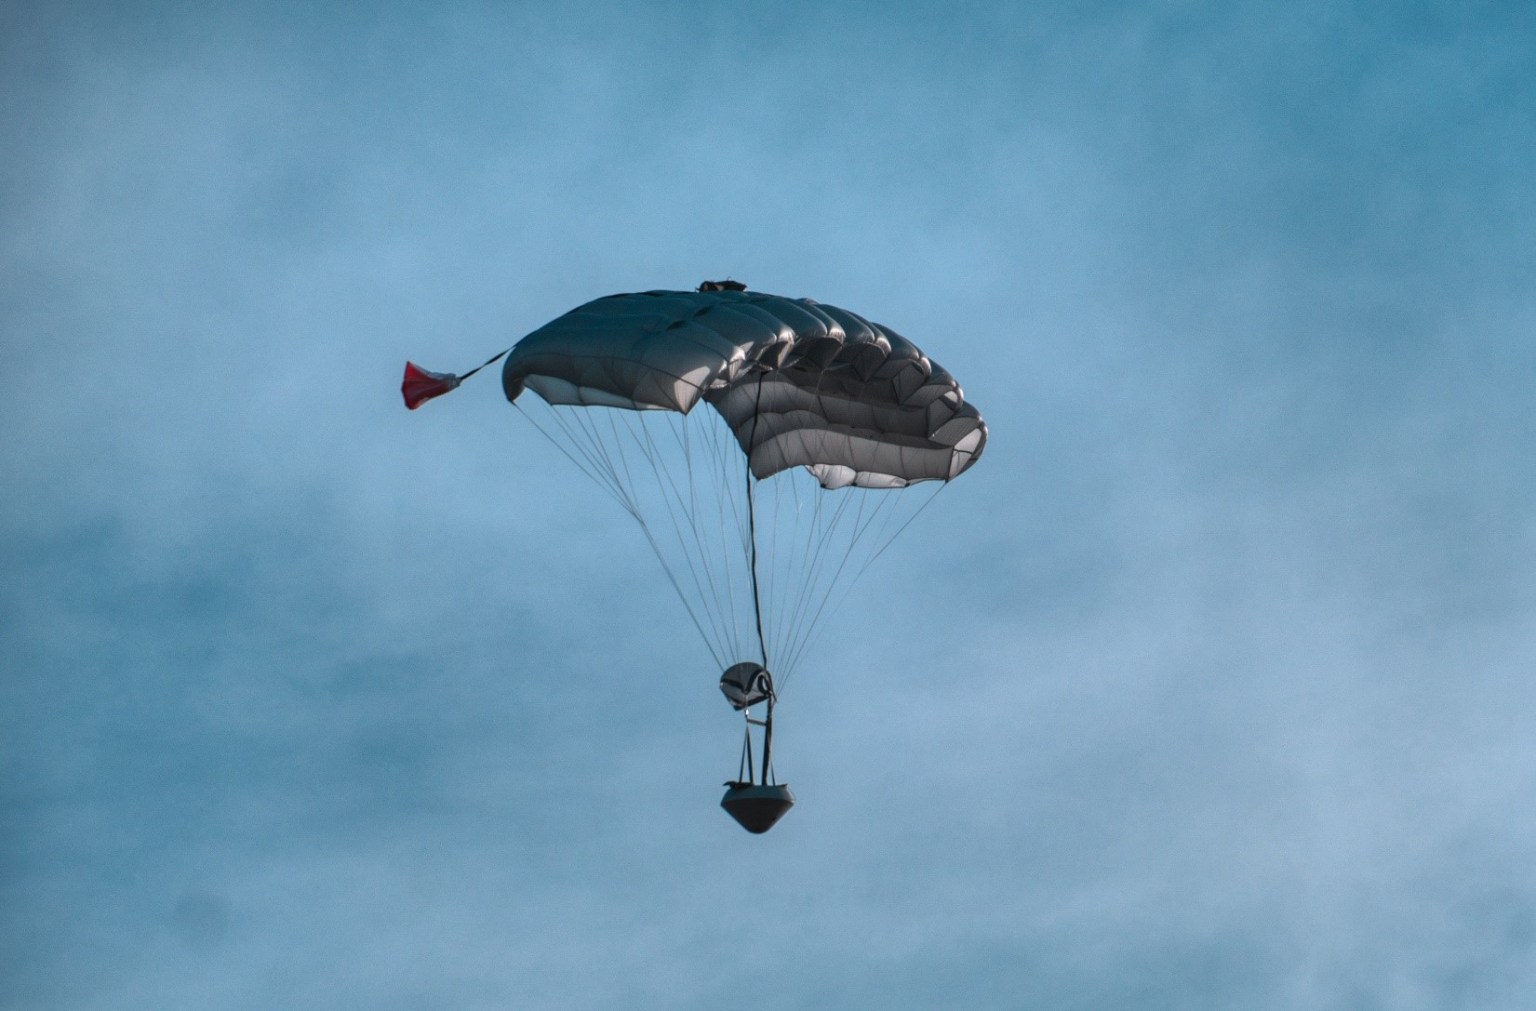 Deployed parachute and payload against a cloudy sky